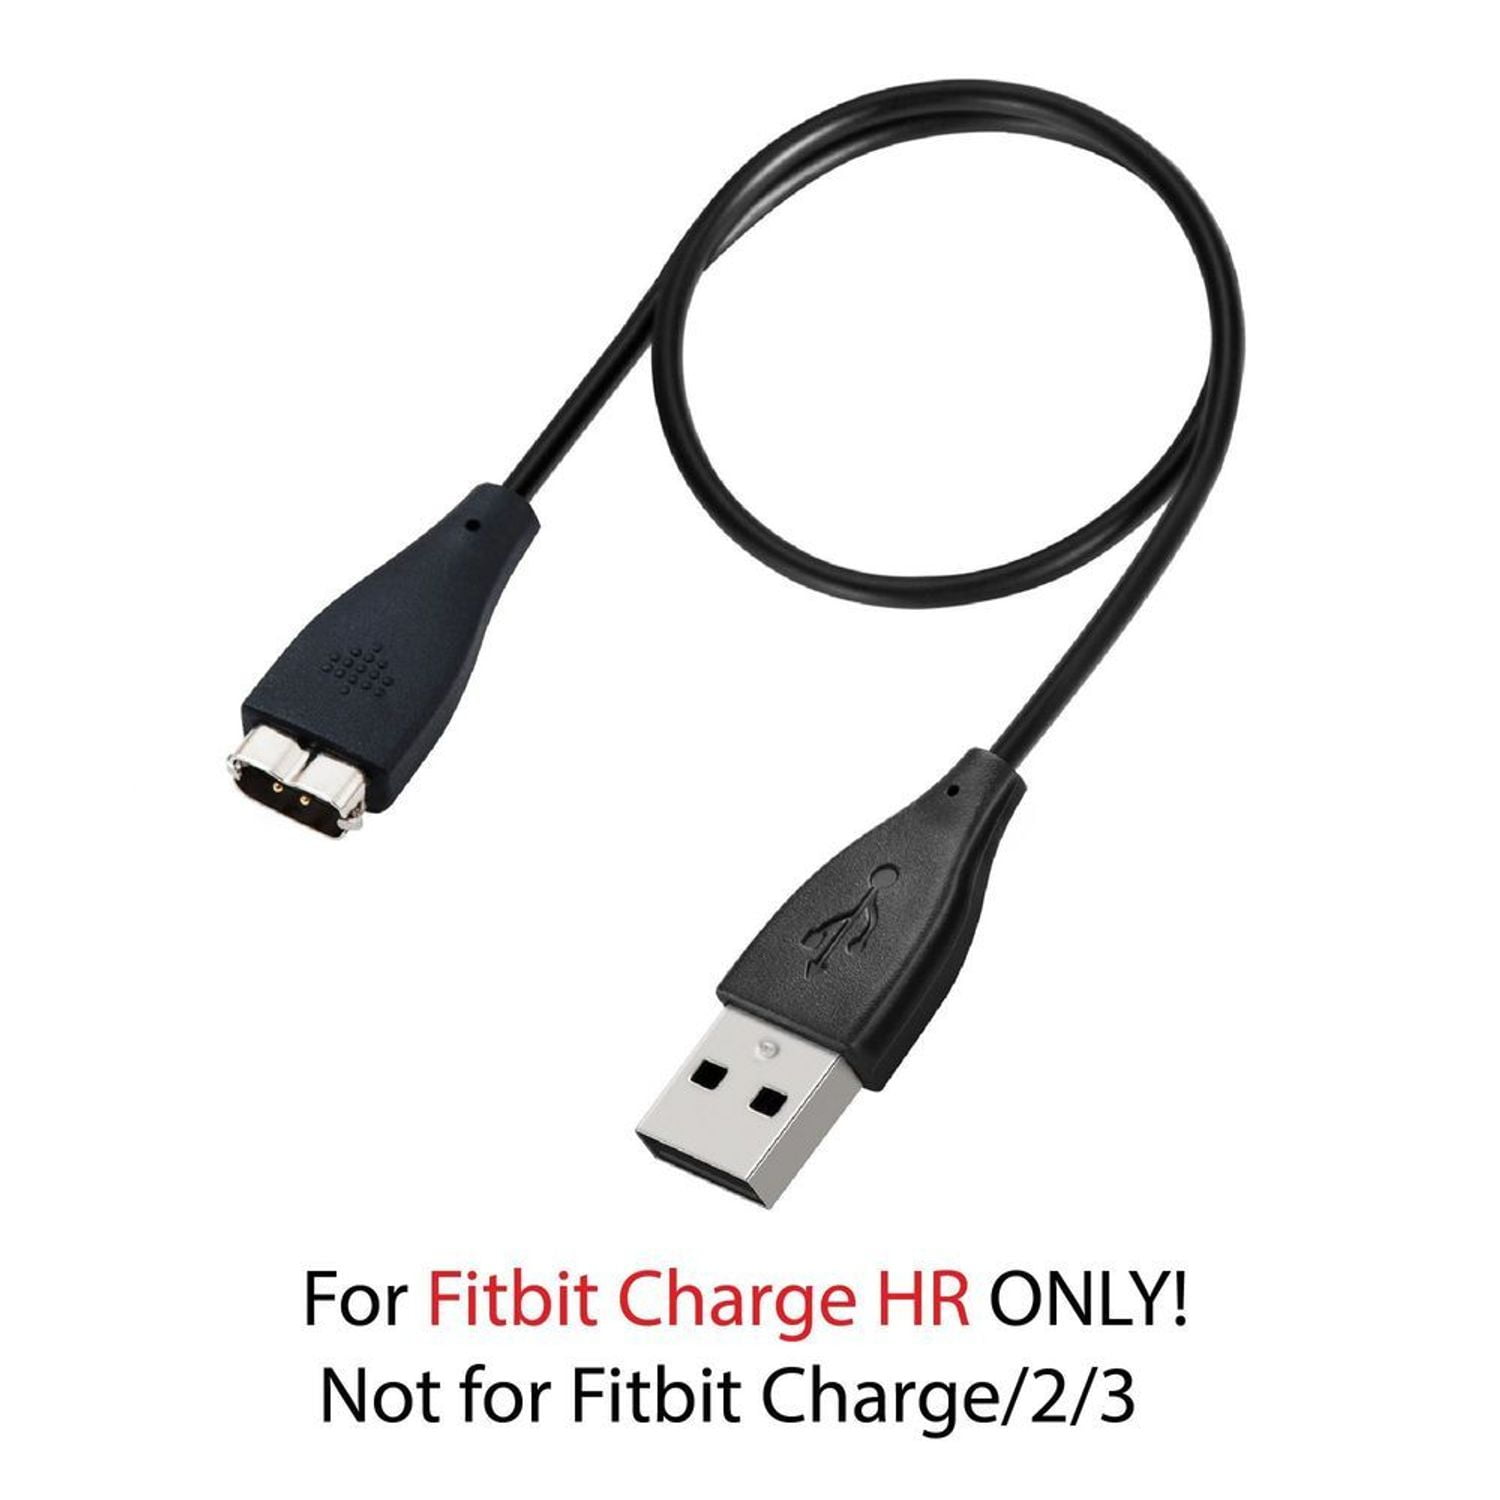 fitbit inspire hr charger walmart